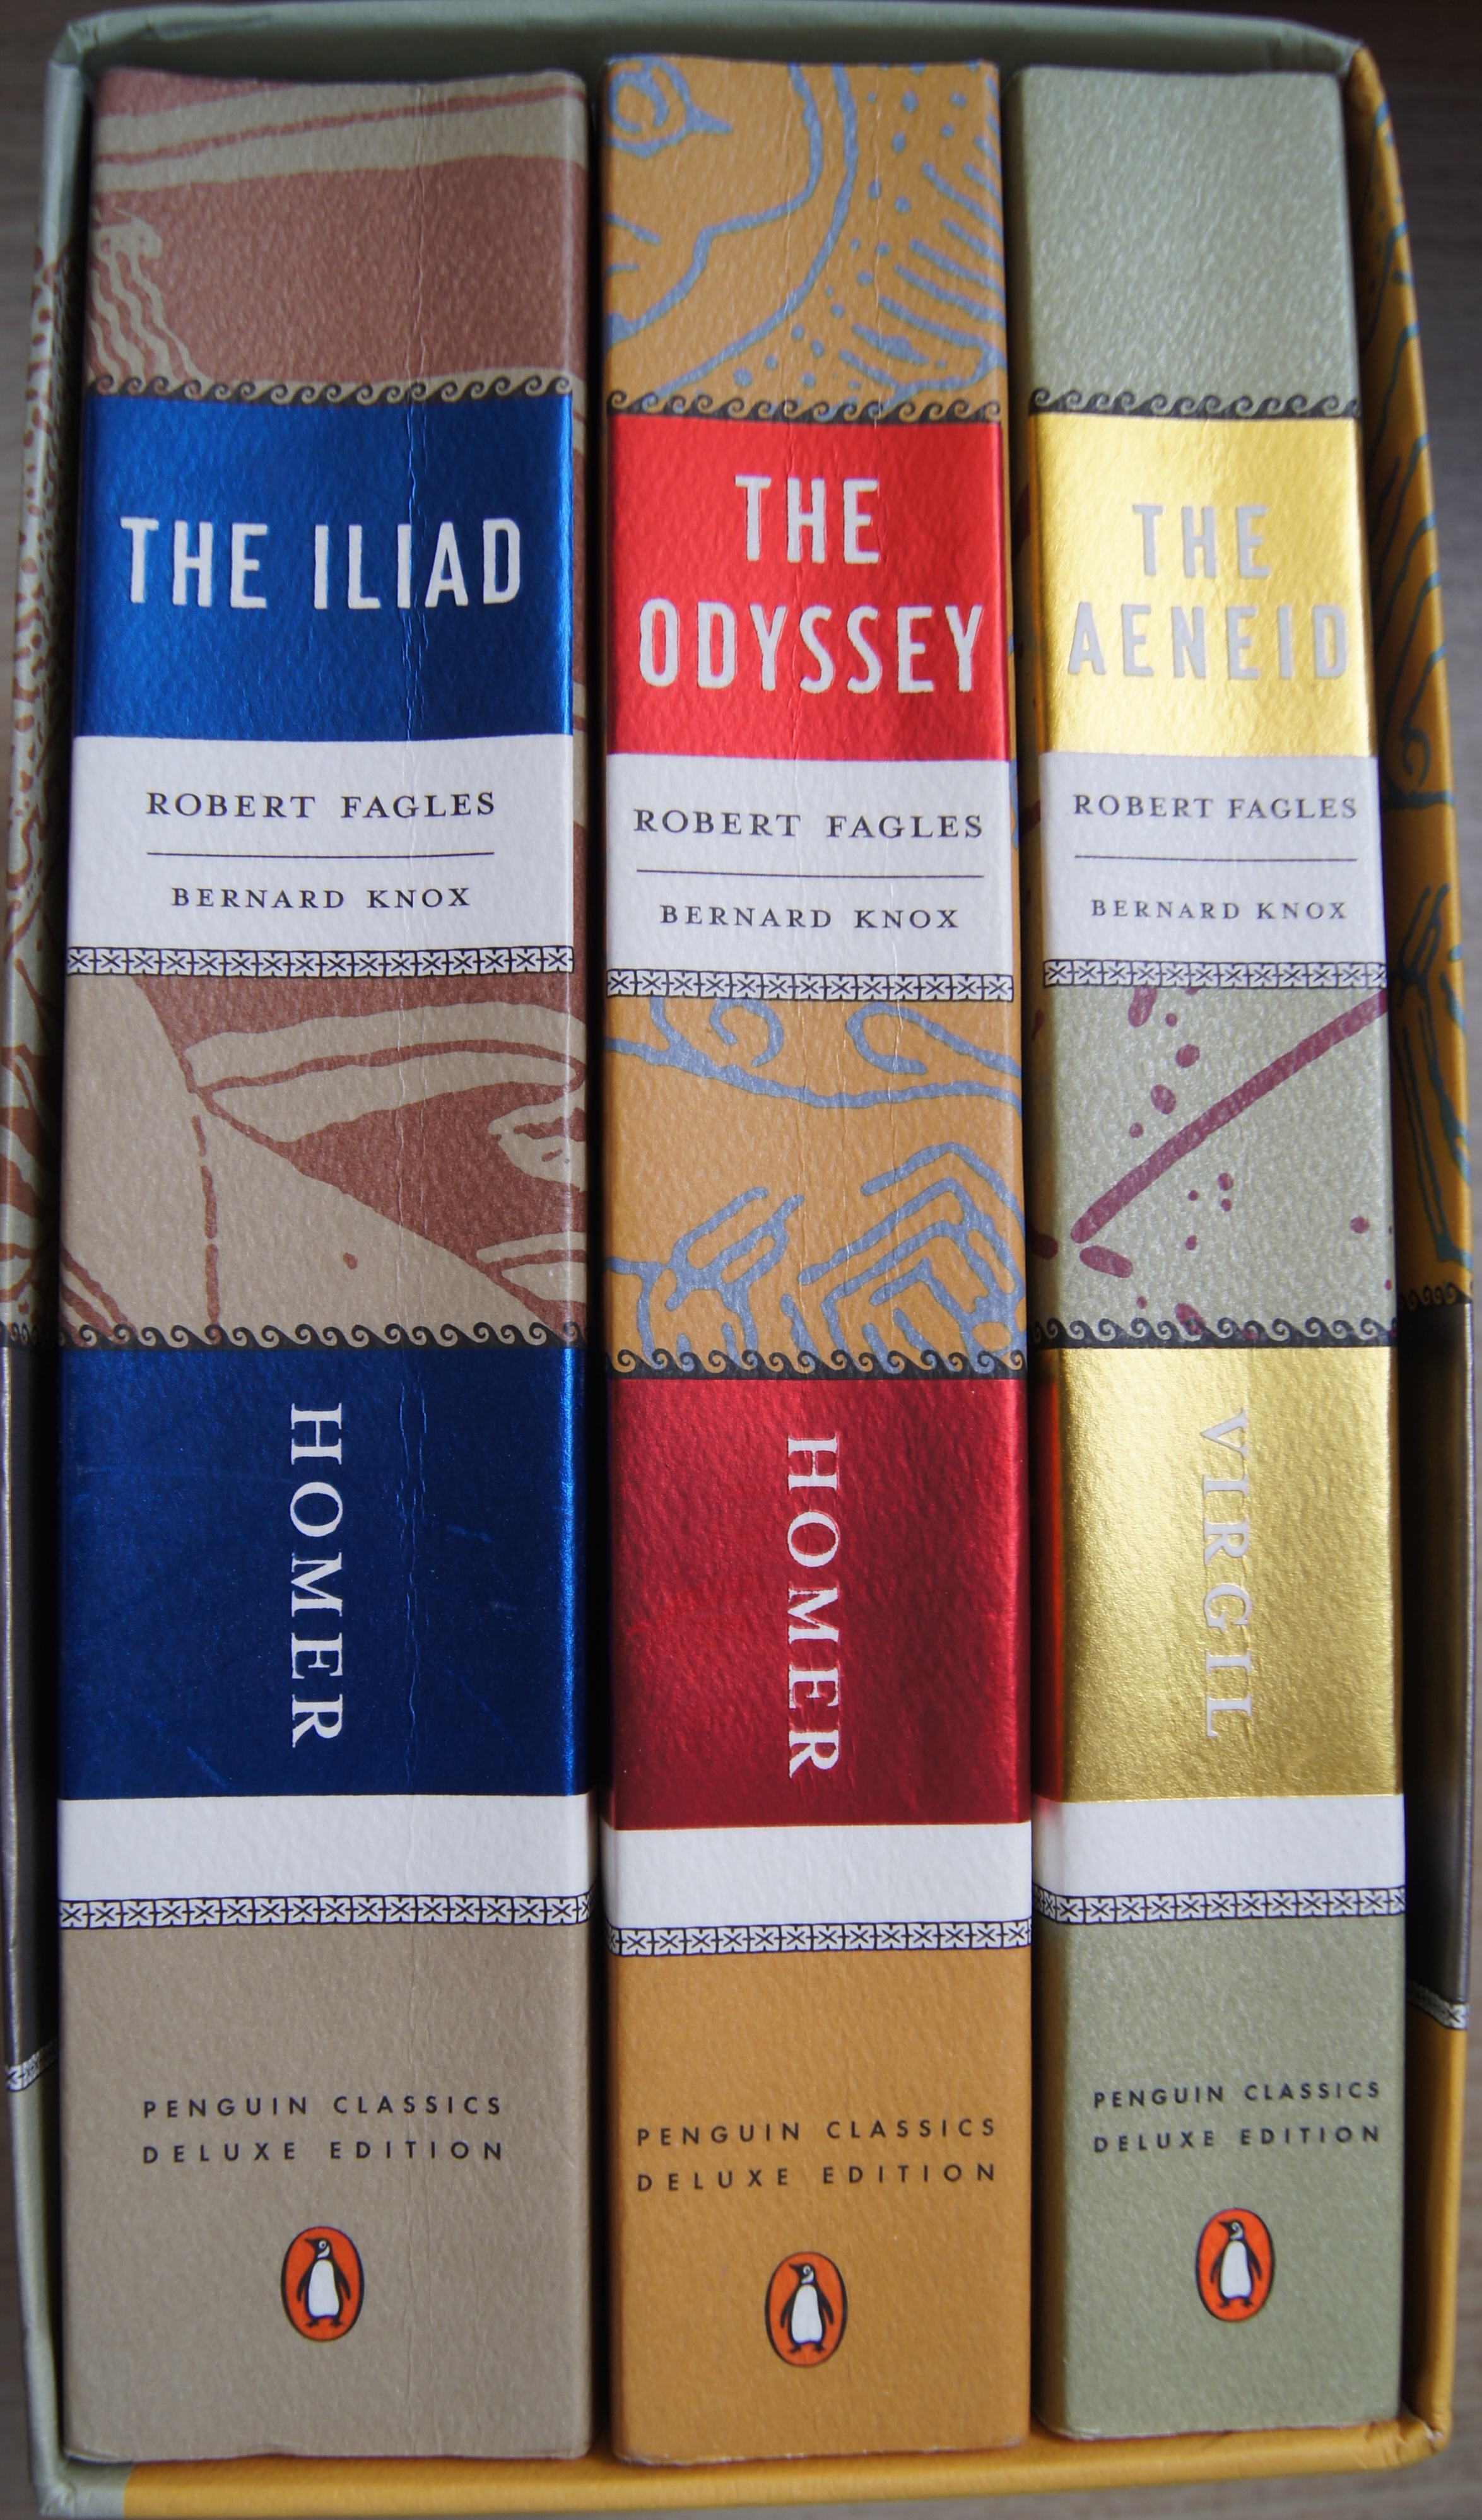 the odyssey by robert fagles